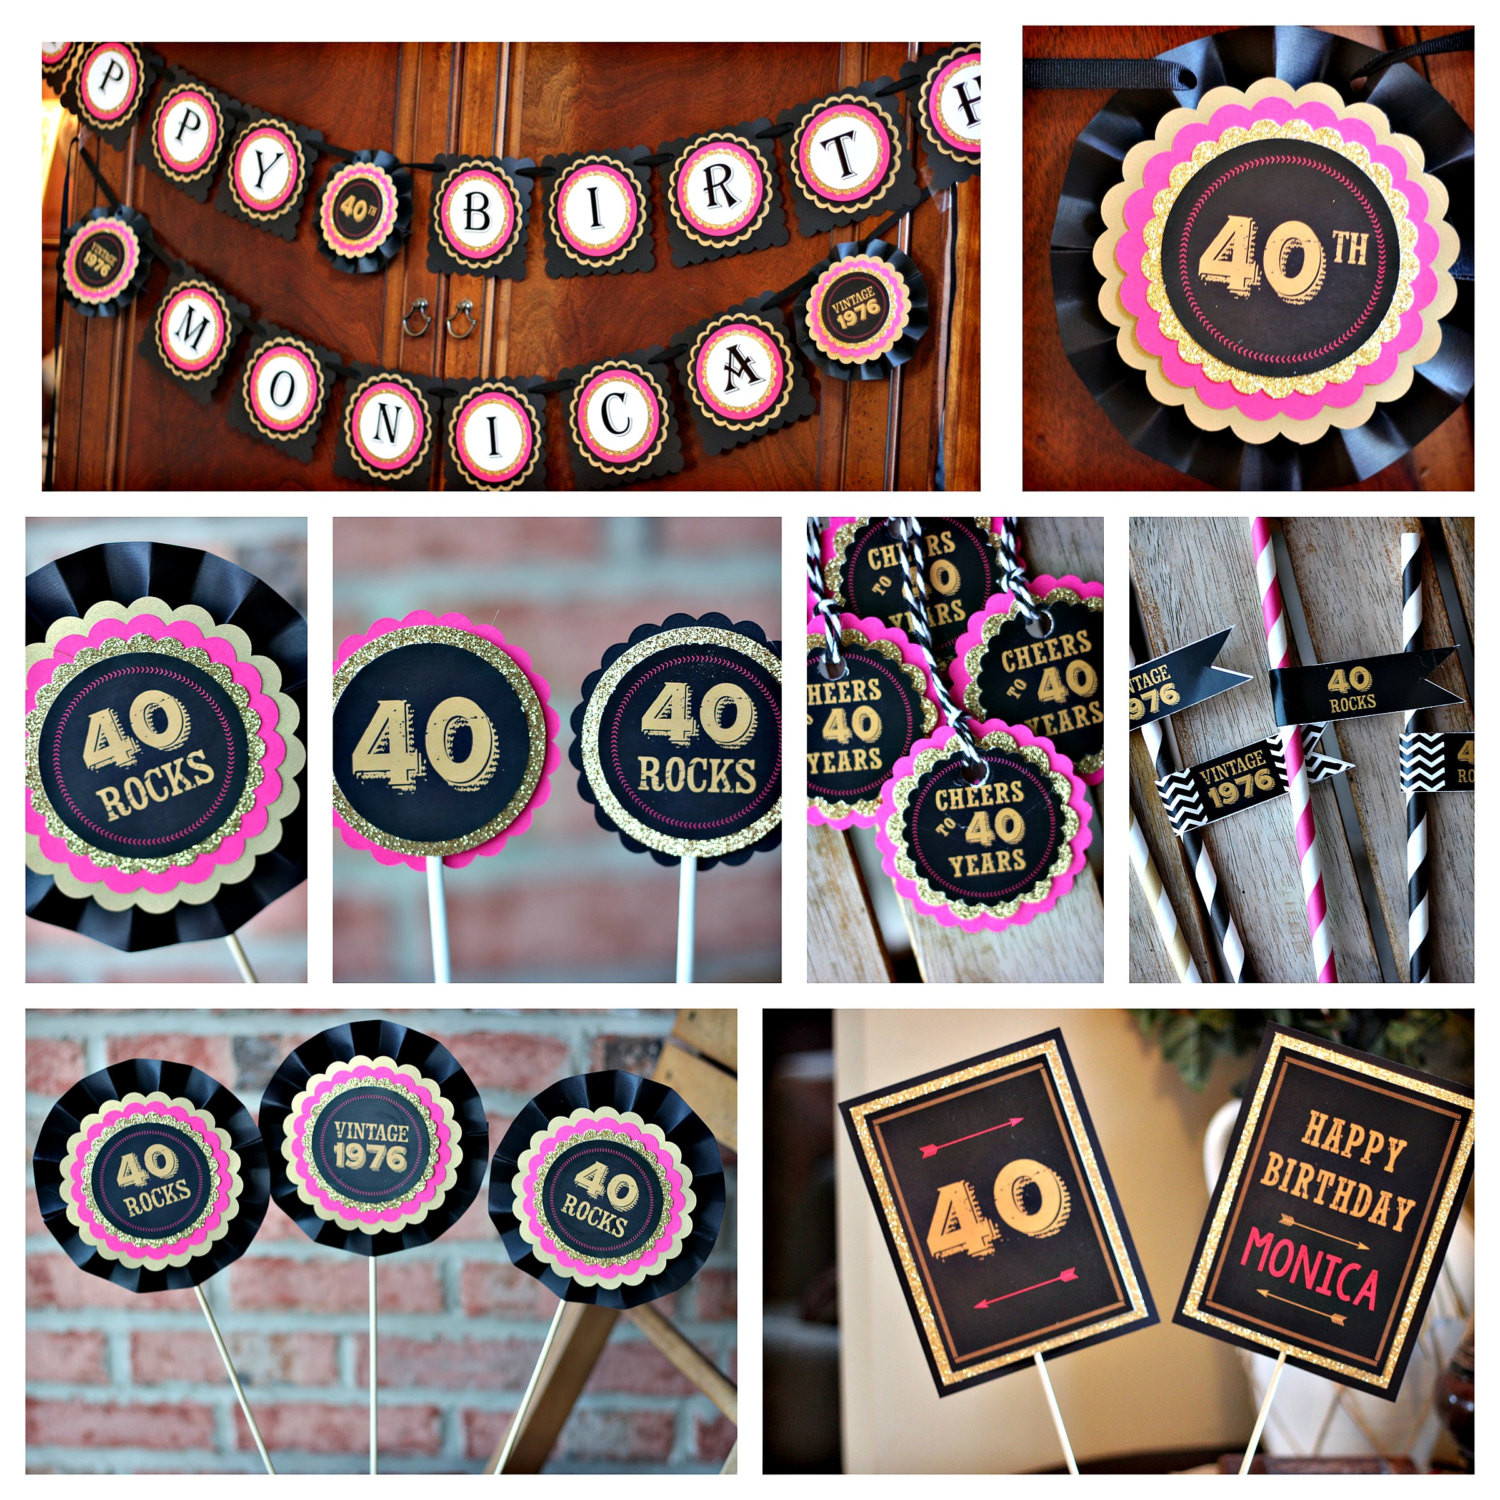 Decorations For 40th Birthday
 La s 40th birthday party decorations Black hot pink and